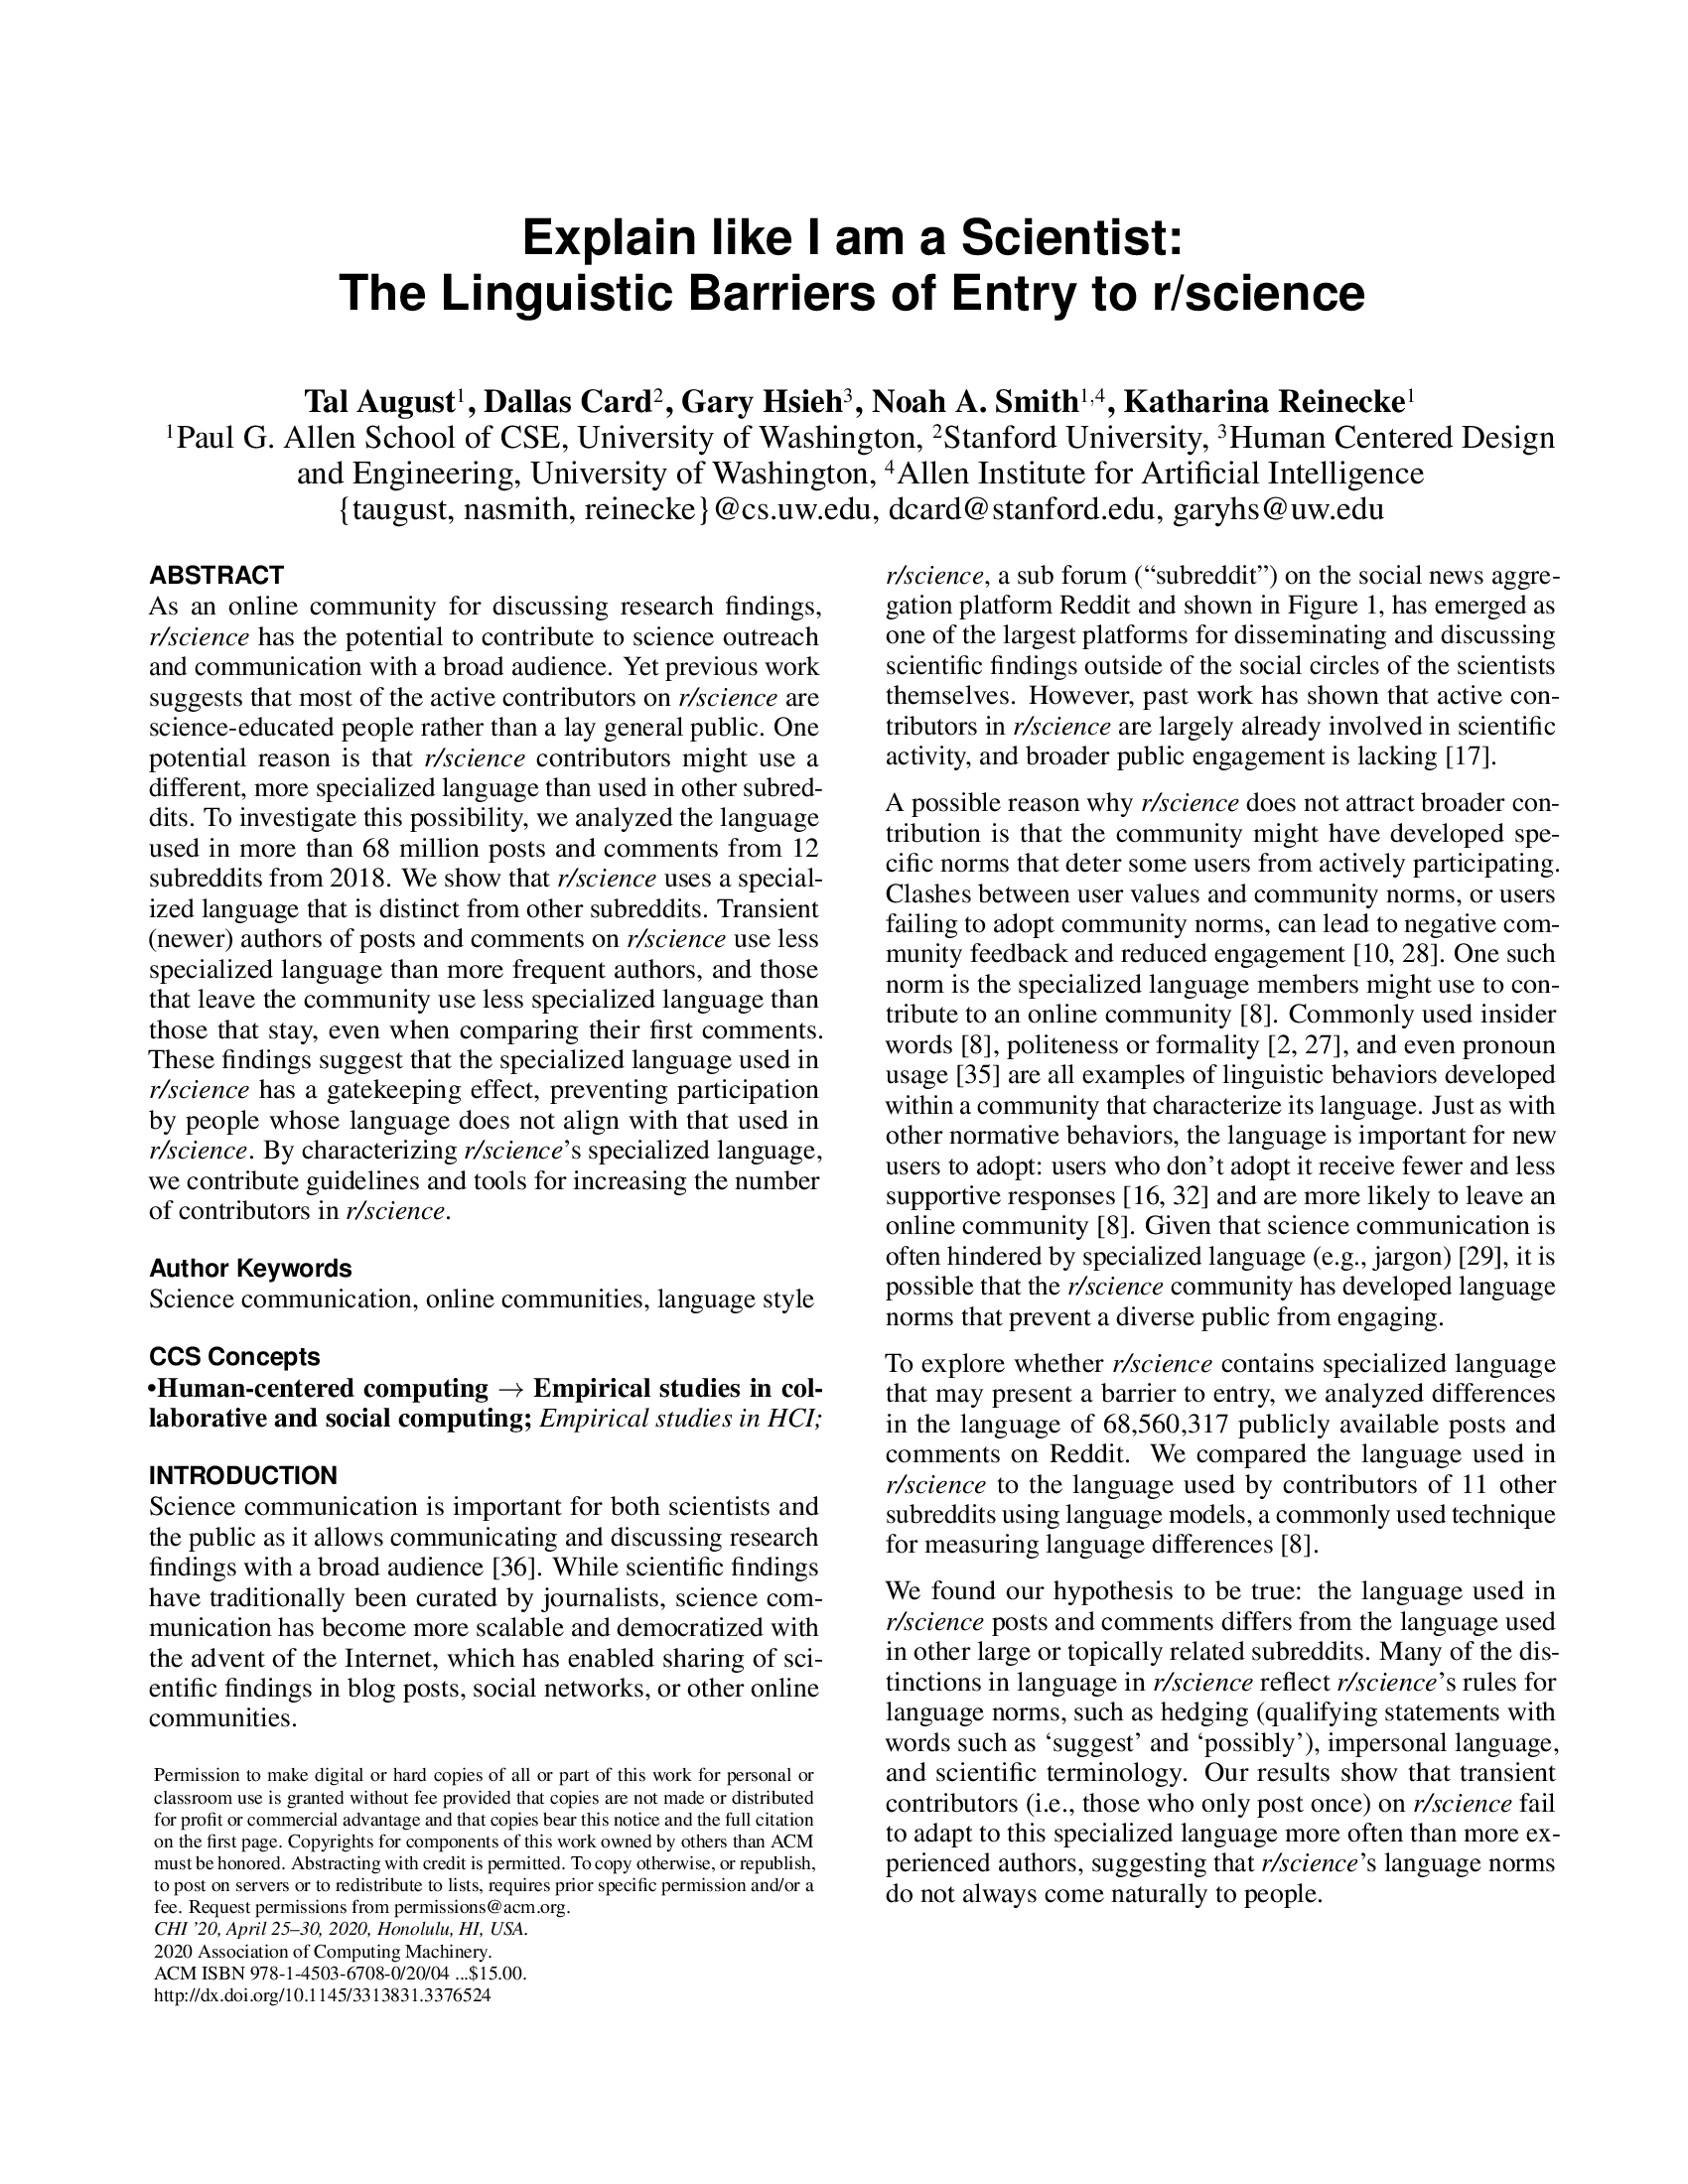 Explain like I am a Scientist: The Linguistic Barriers of Entry to r/science